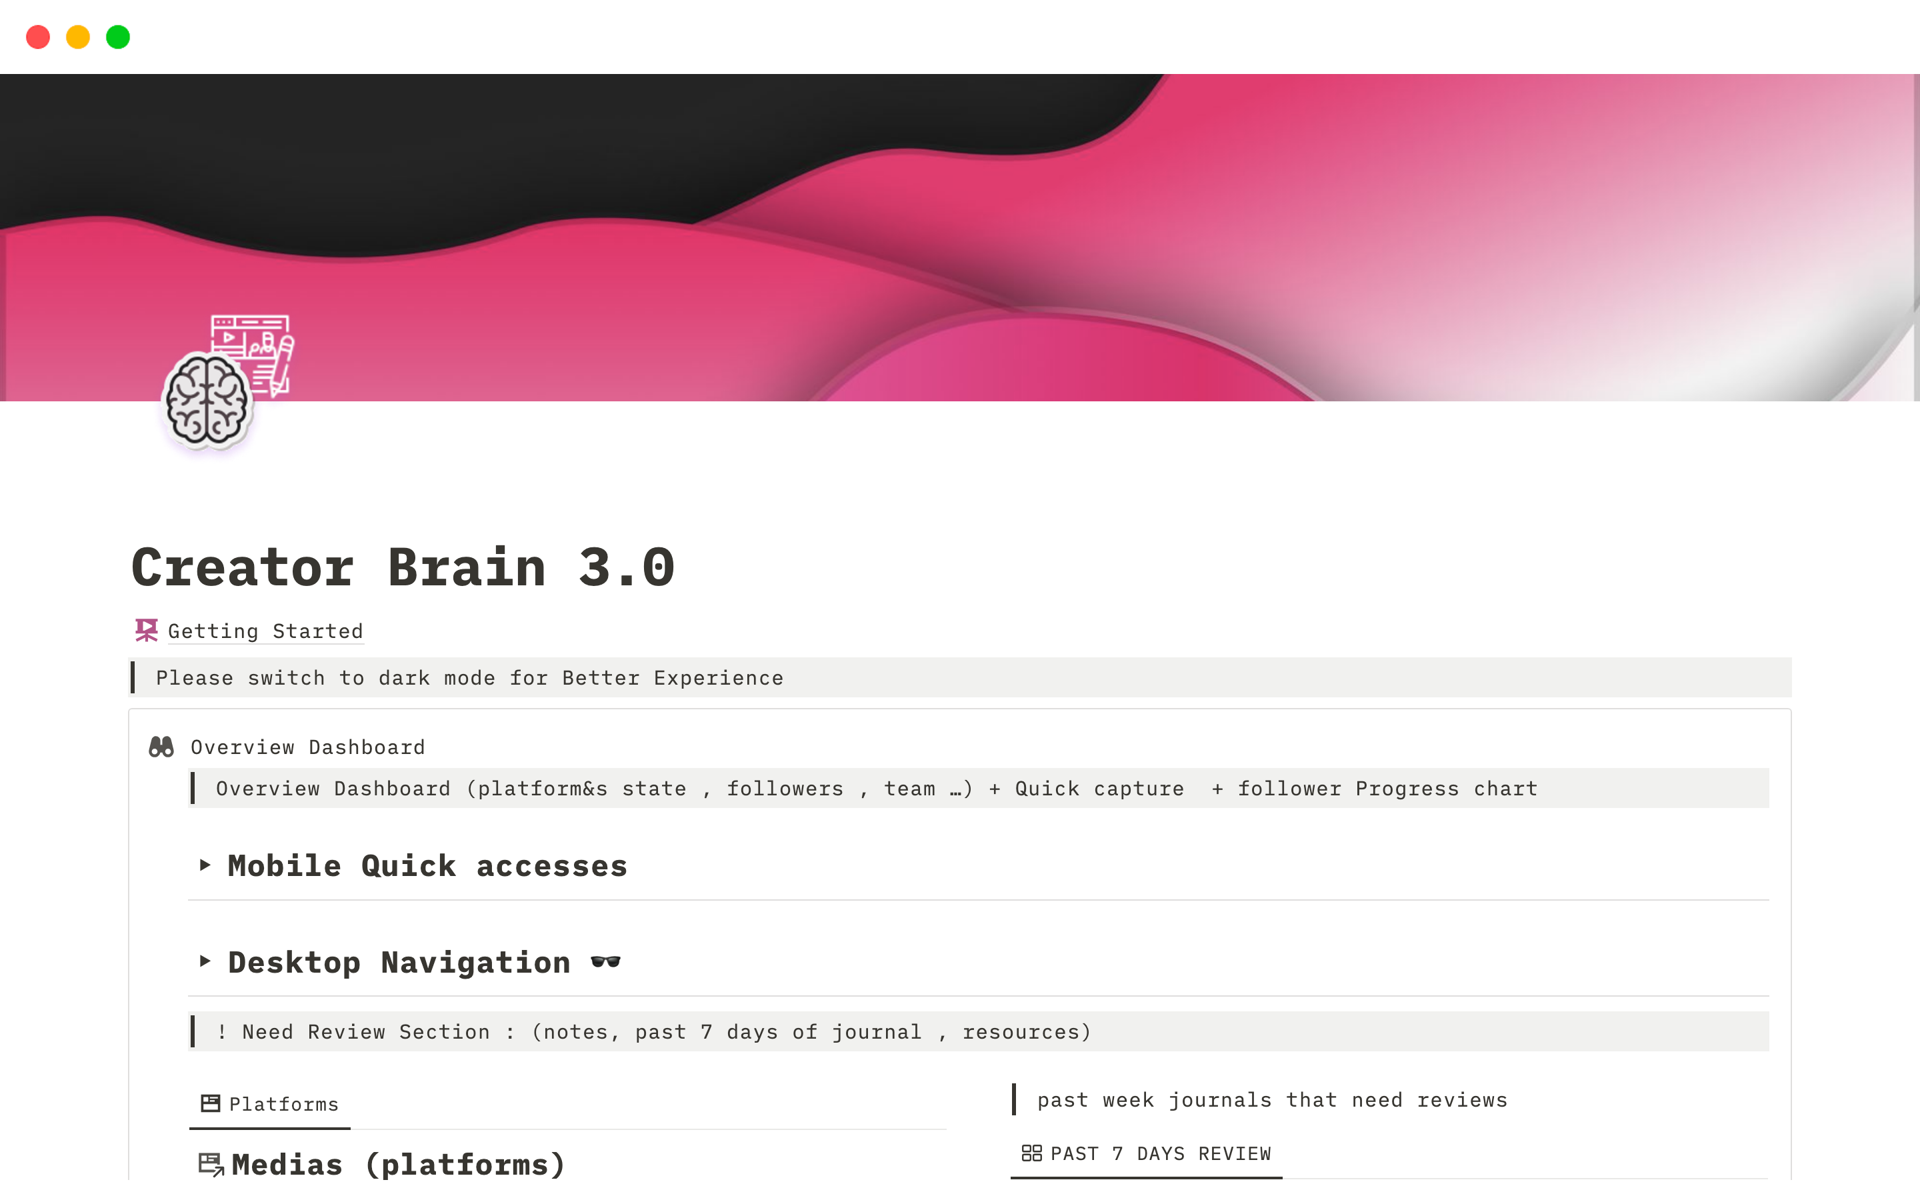 A template preview for Creator Brain 3.0